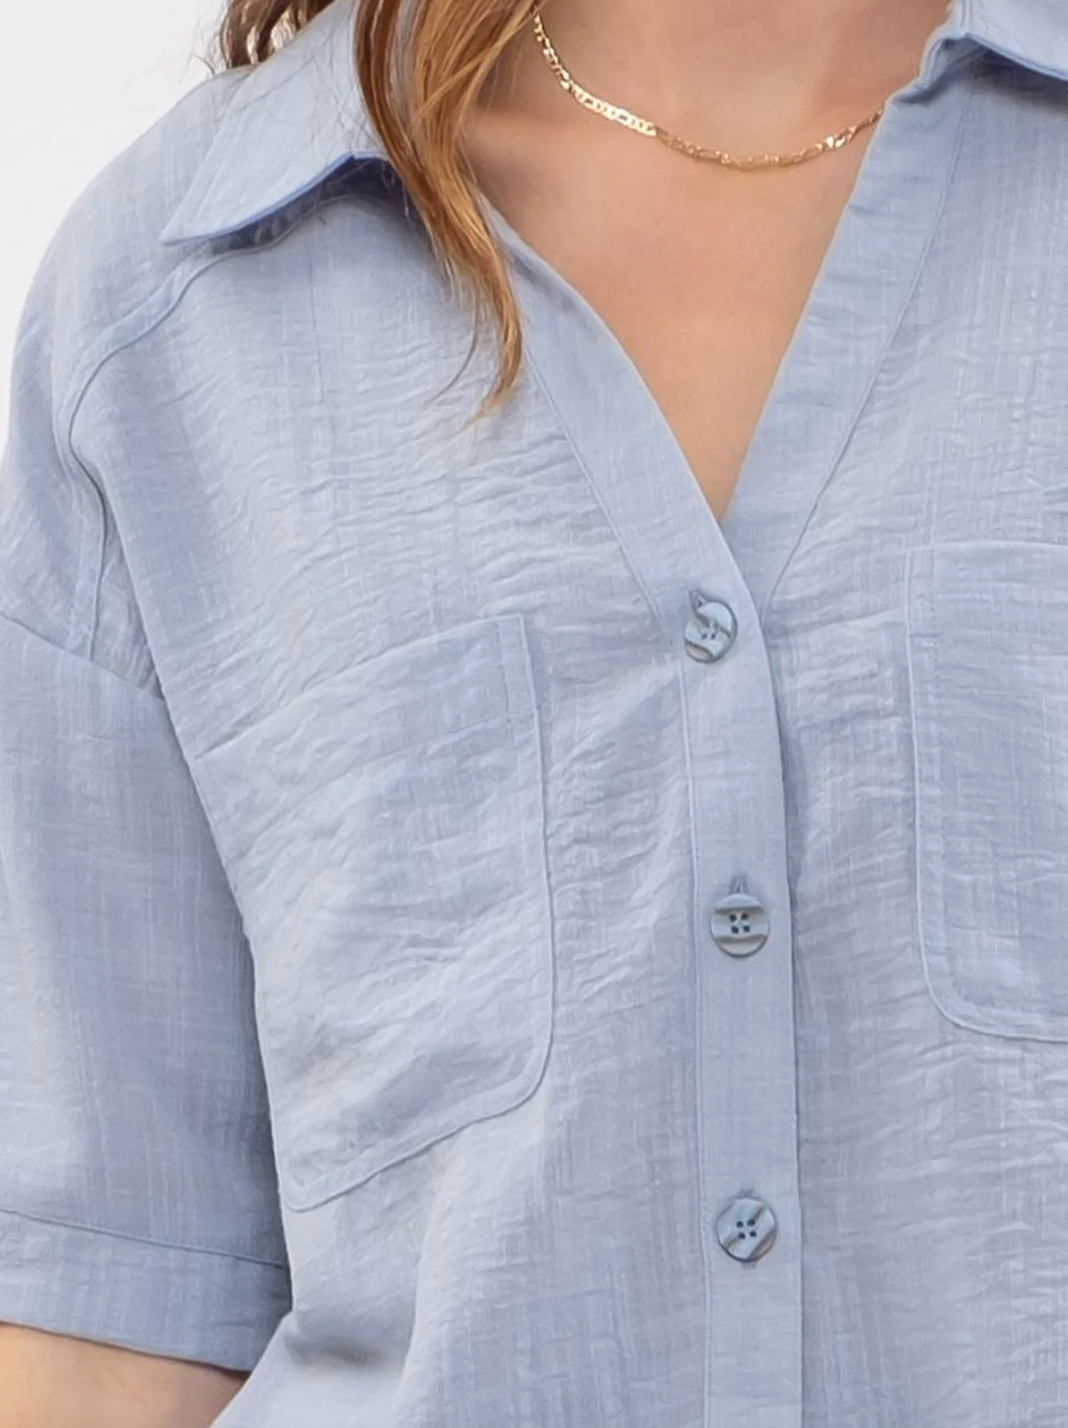 Short Sleeve Button Down Shirt in Baby Blue - The Street Boutique 